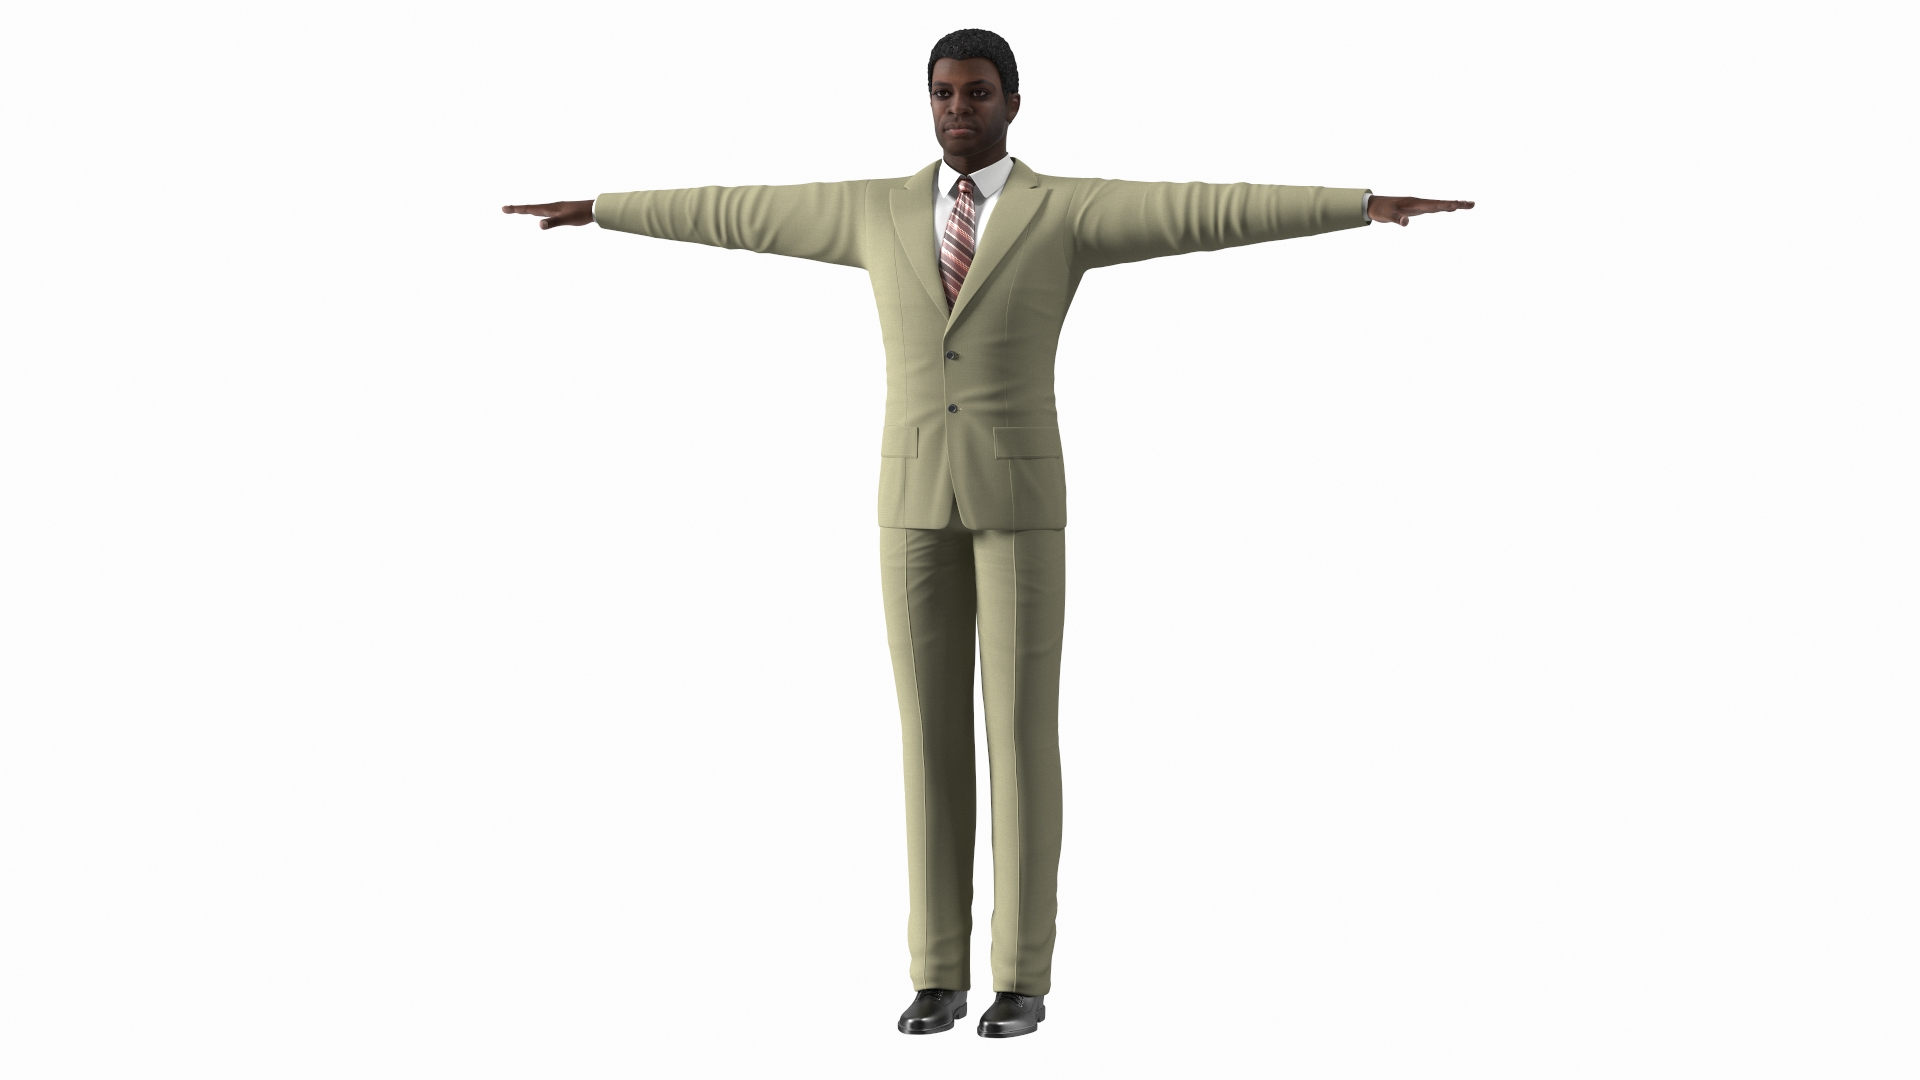 p3d.in - A 3D model of a man in a T-pose